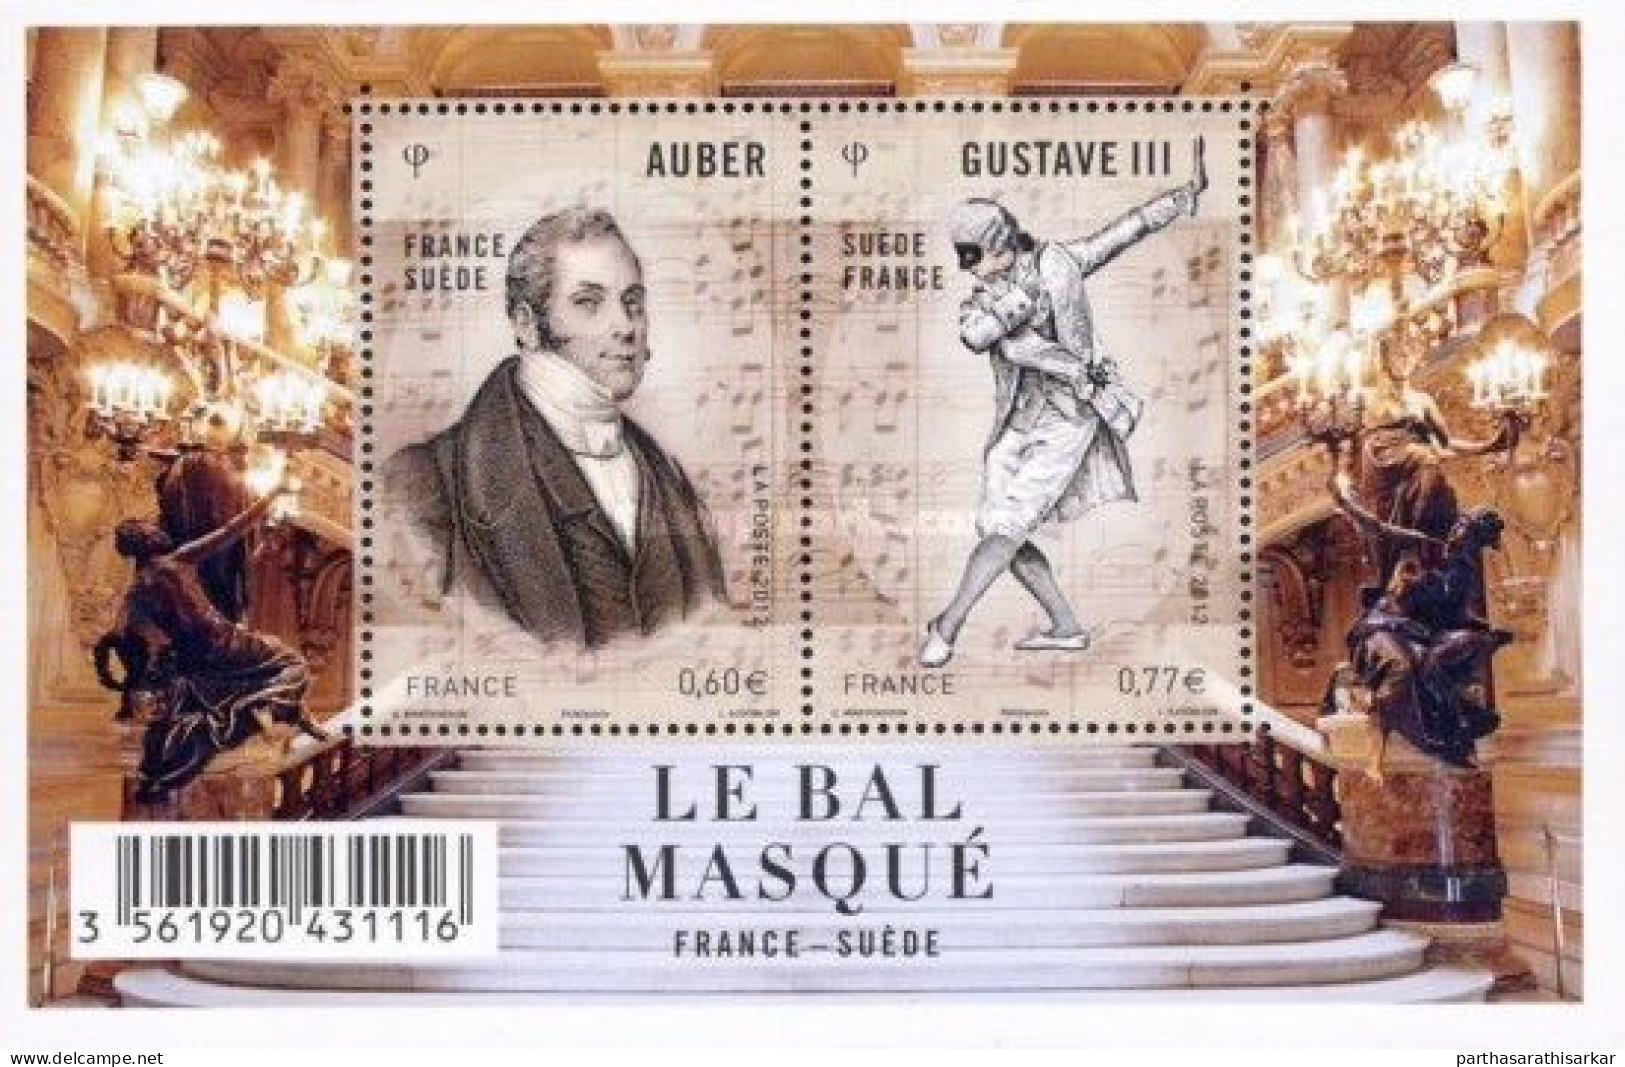 FRANCE 2012 MUSICIAN JOINT ISSUE WITH SWEDEN MINIATURE SHEET MS MNH - Emissions Communes